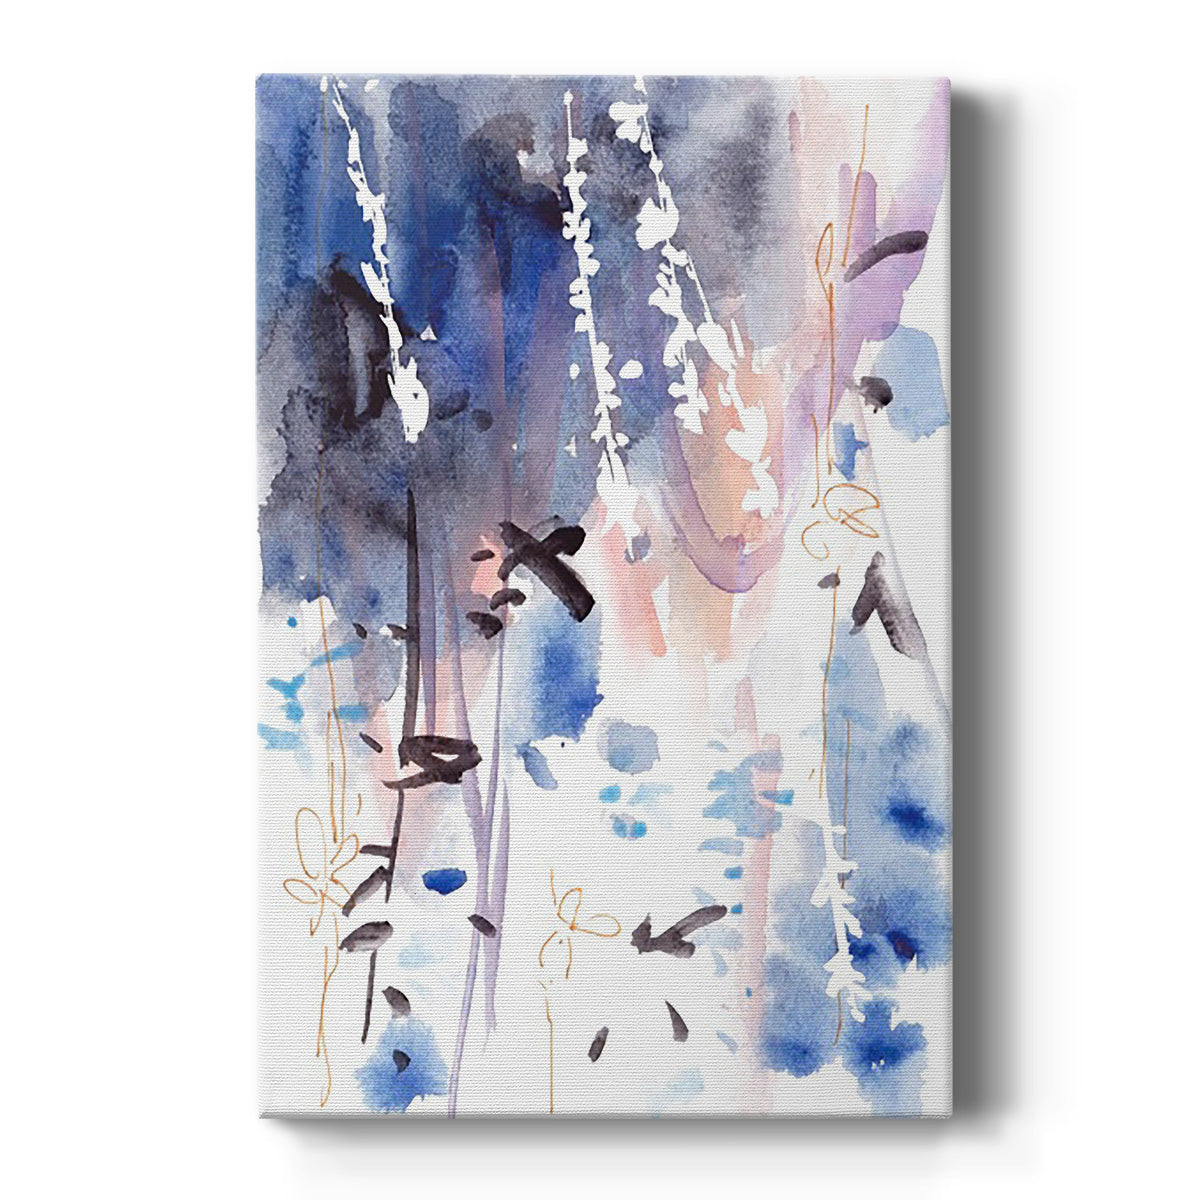 Late Night Breeze IV Premium Gallery Wrapped Canvas - Ready to Hang